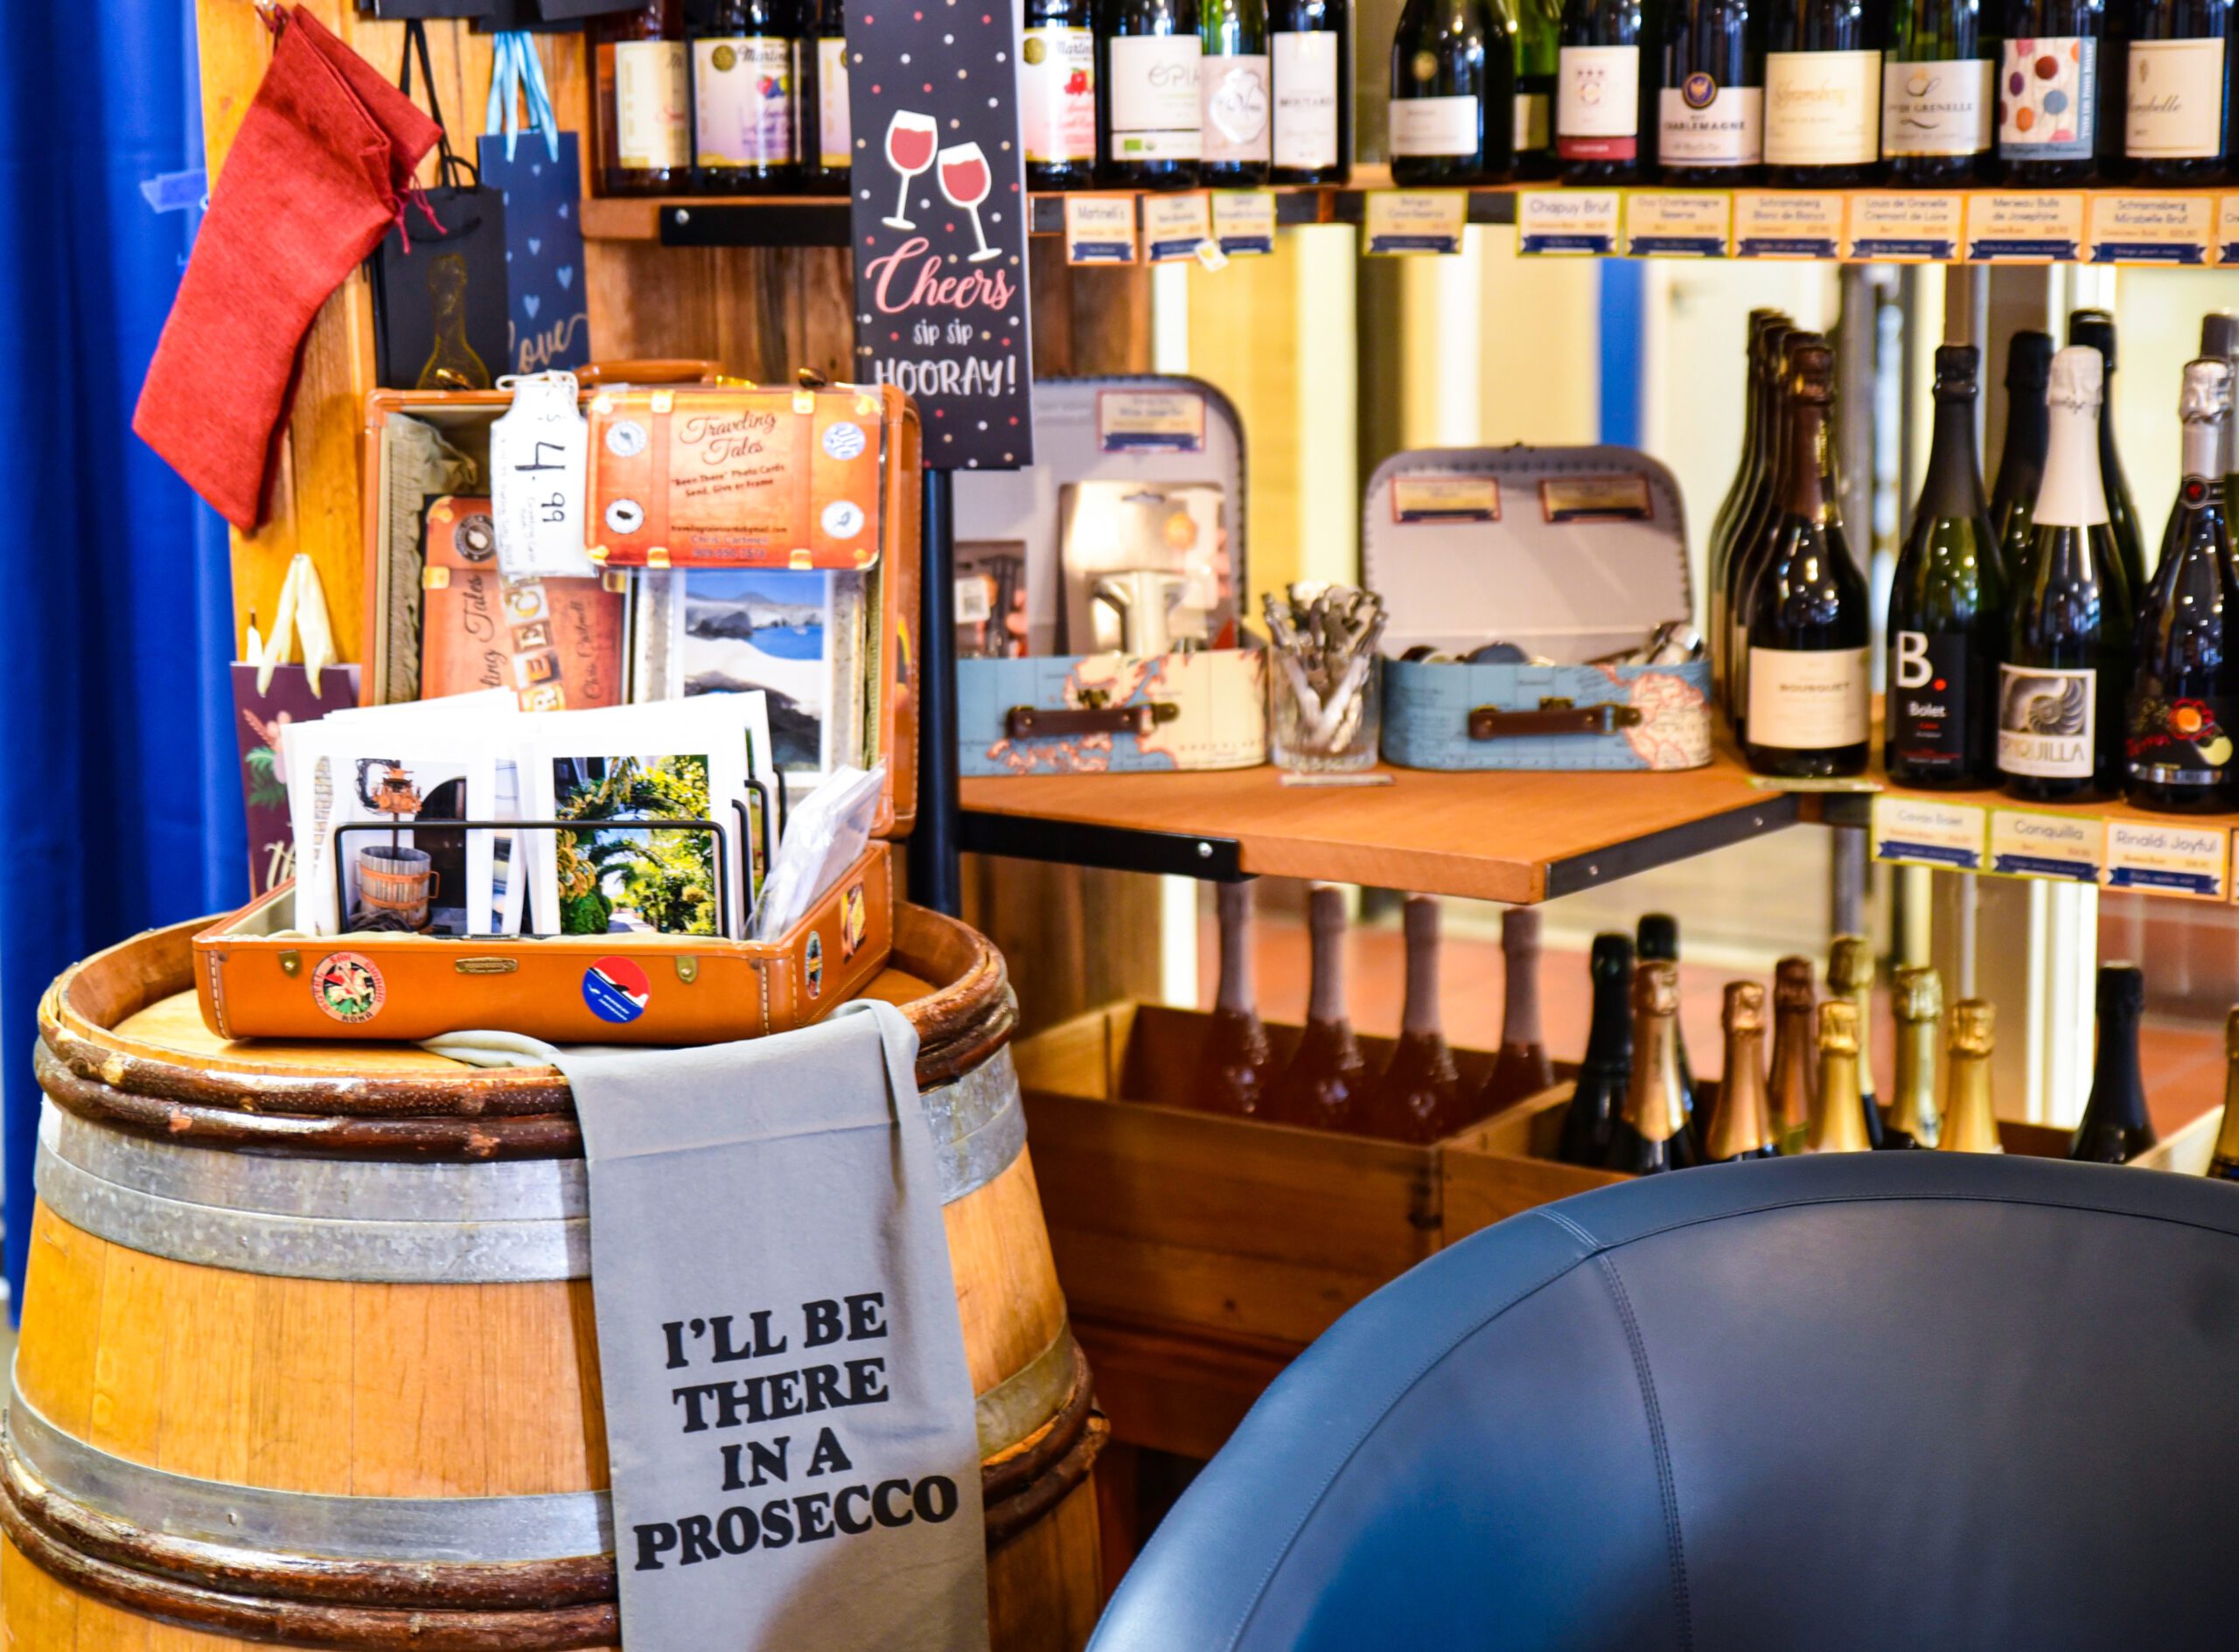 There is a small boutique store in a wine shop featuring memorabilia for wine country, nicely presented on top of a wood barrel, in front of shelves of local wines.